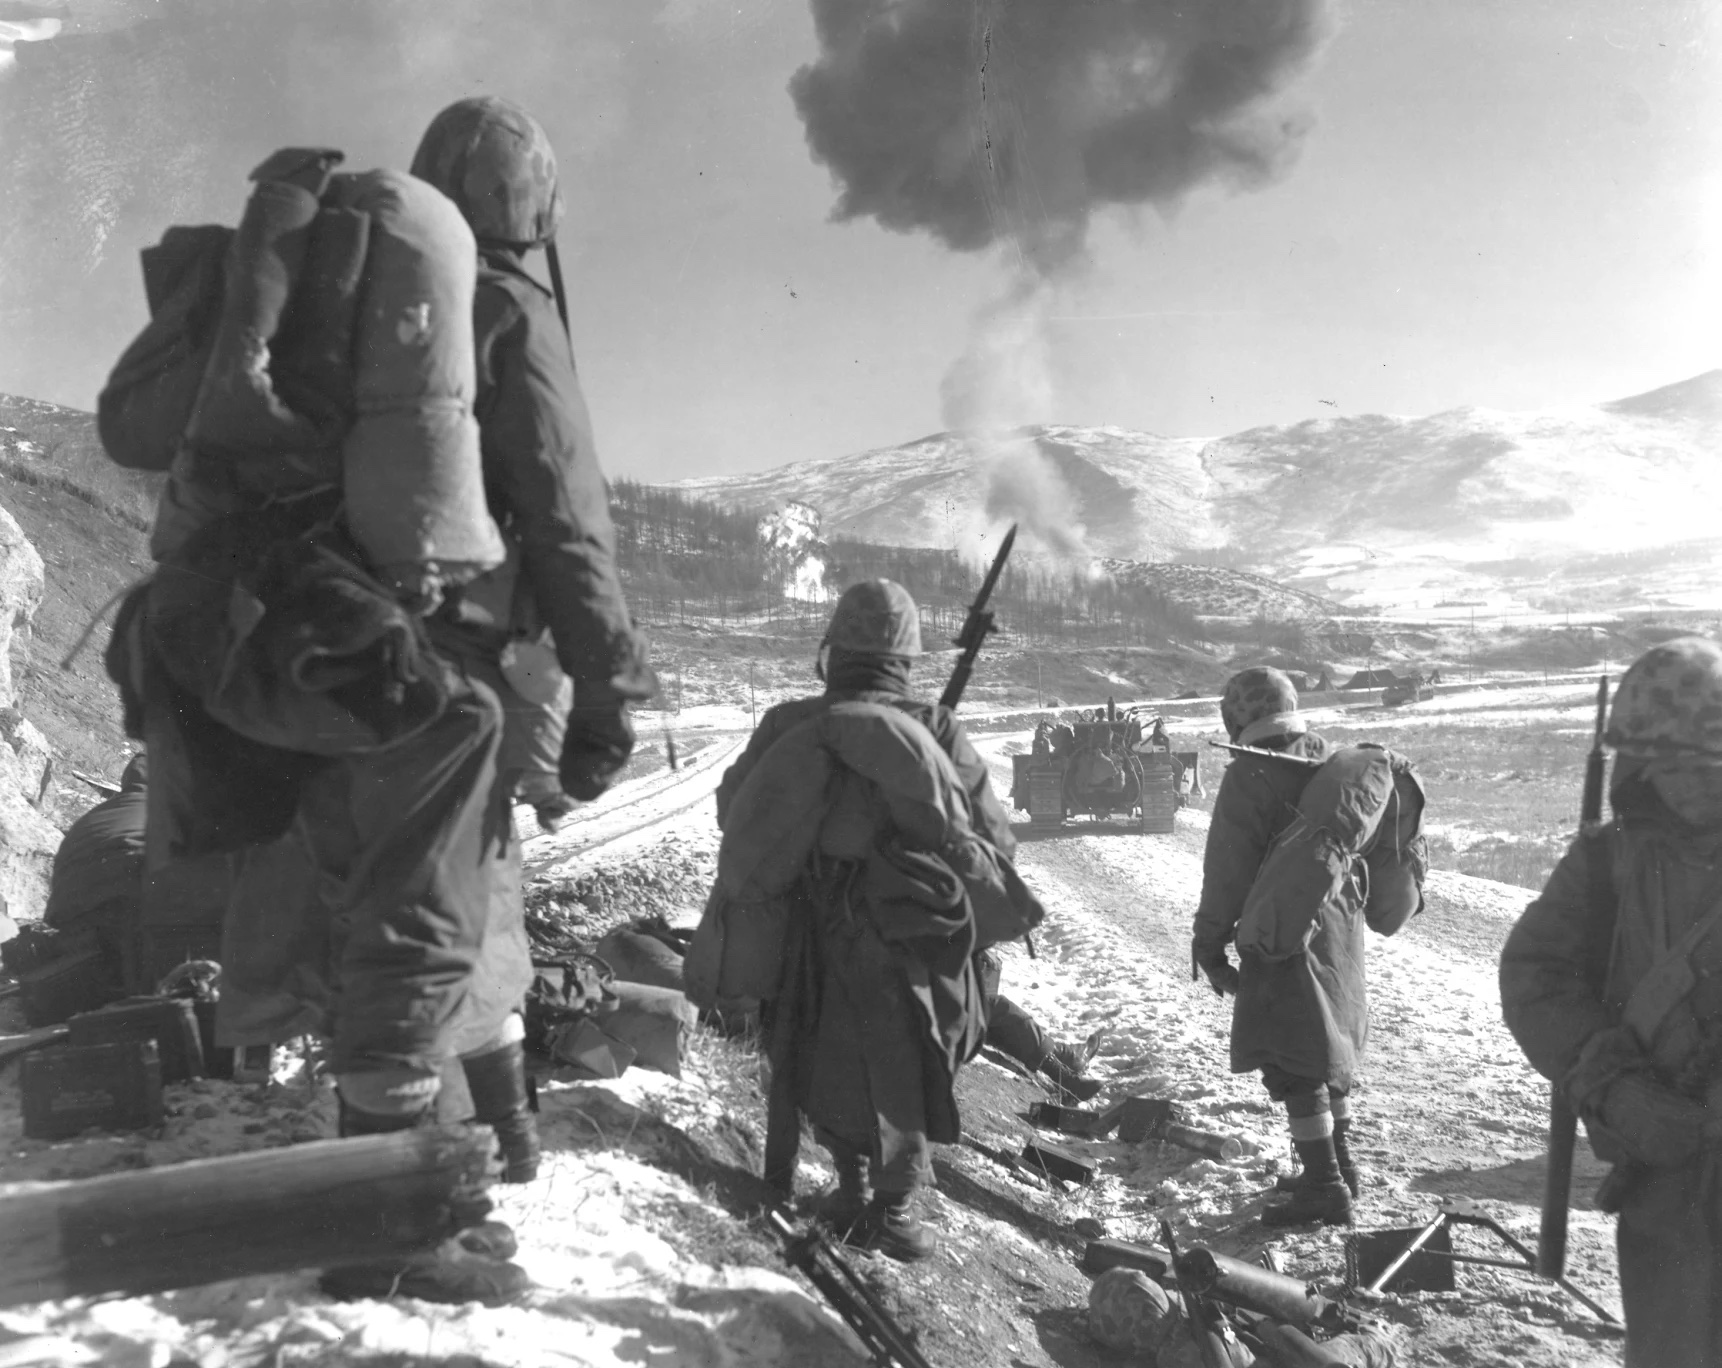 Members of the 1st Marine Division during the Battle of Chosin Reservoir. (USMC)